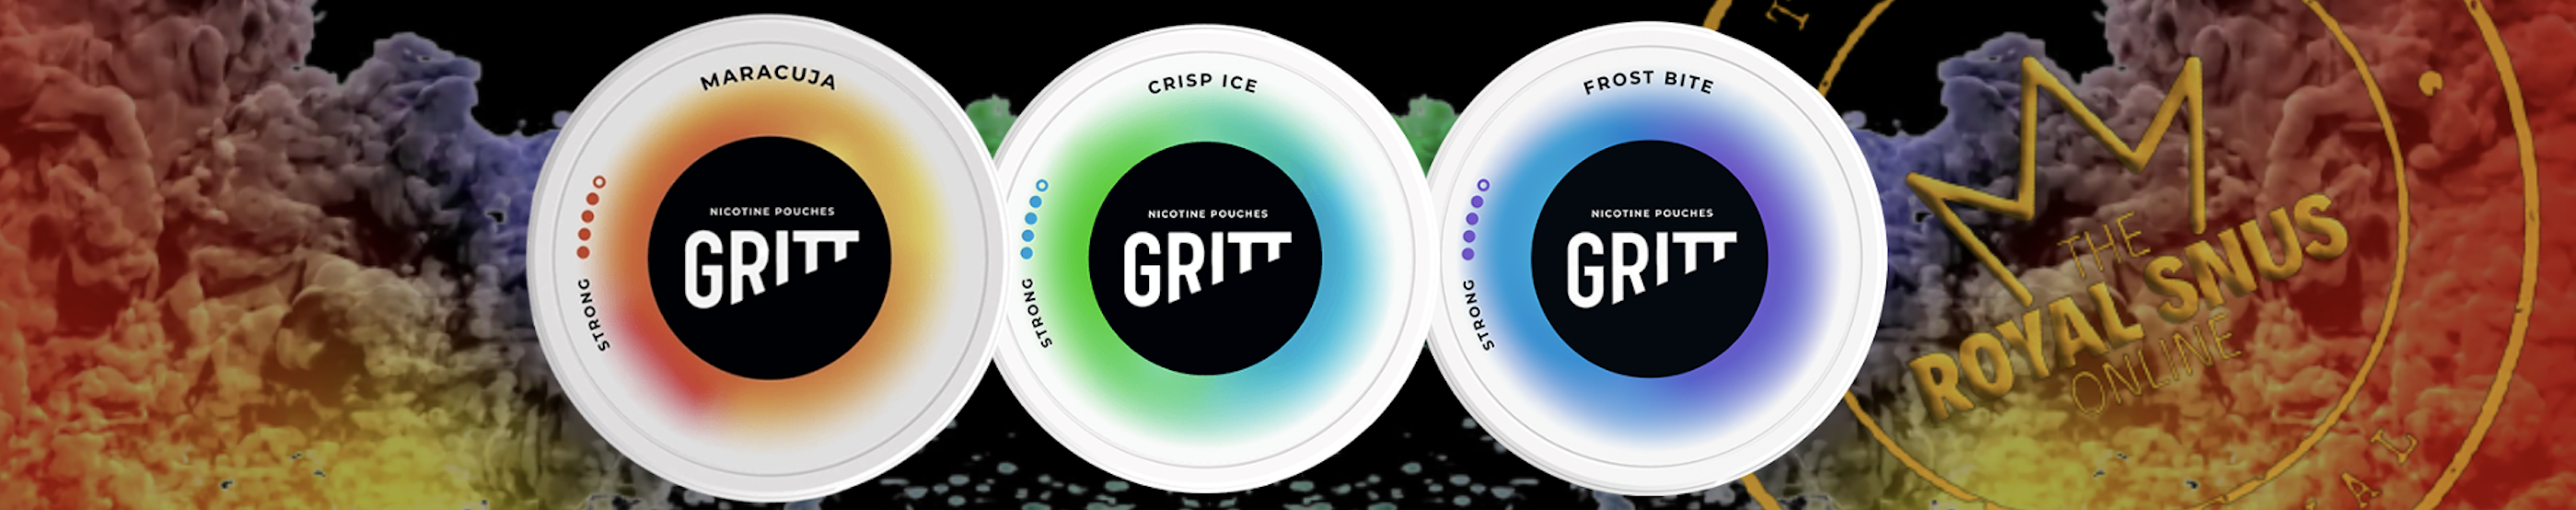 Buy Gritt nicotine pouches